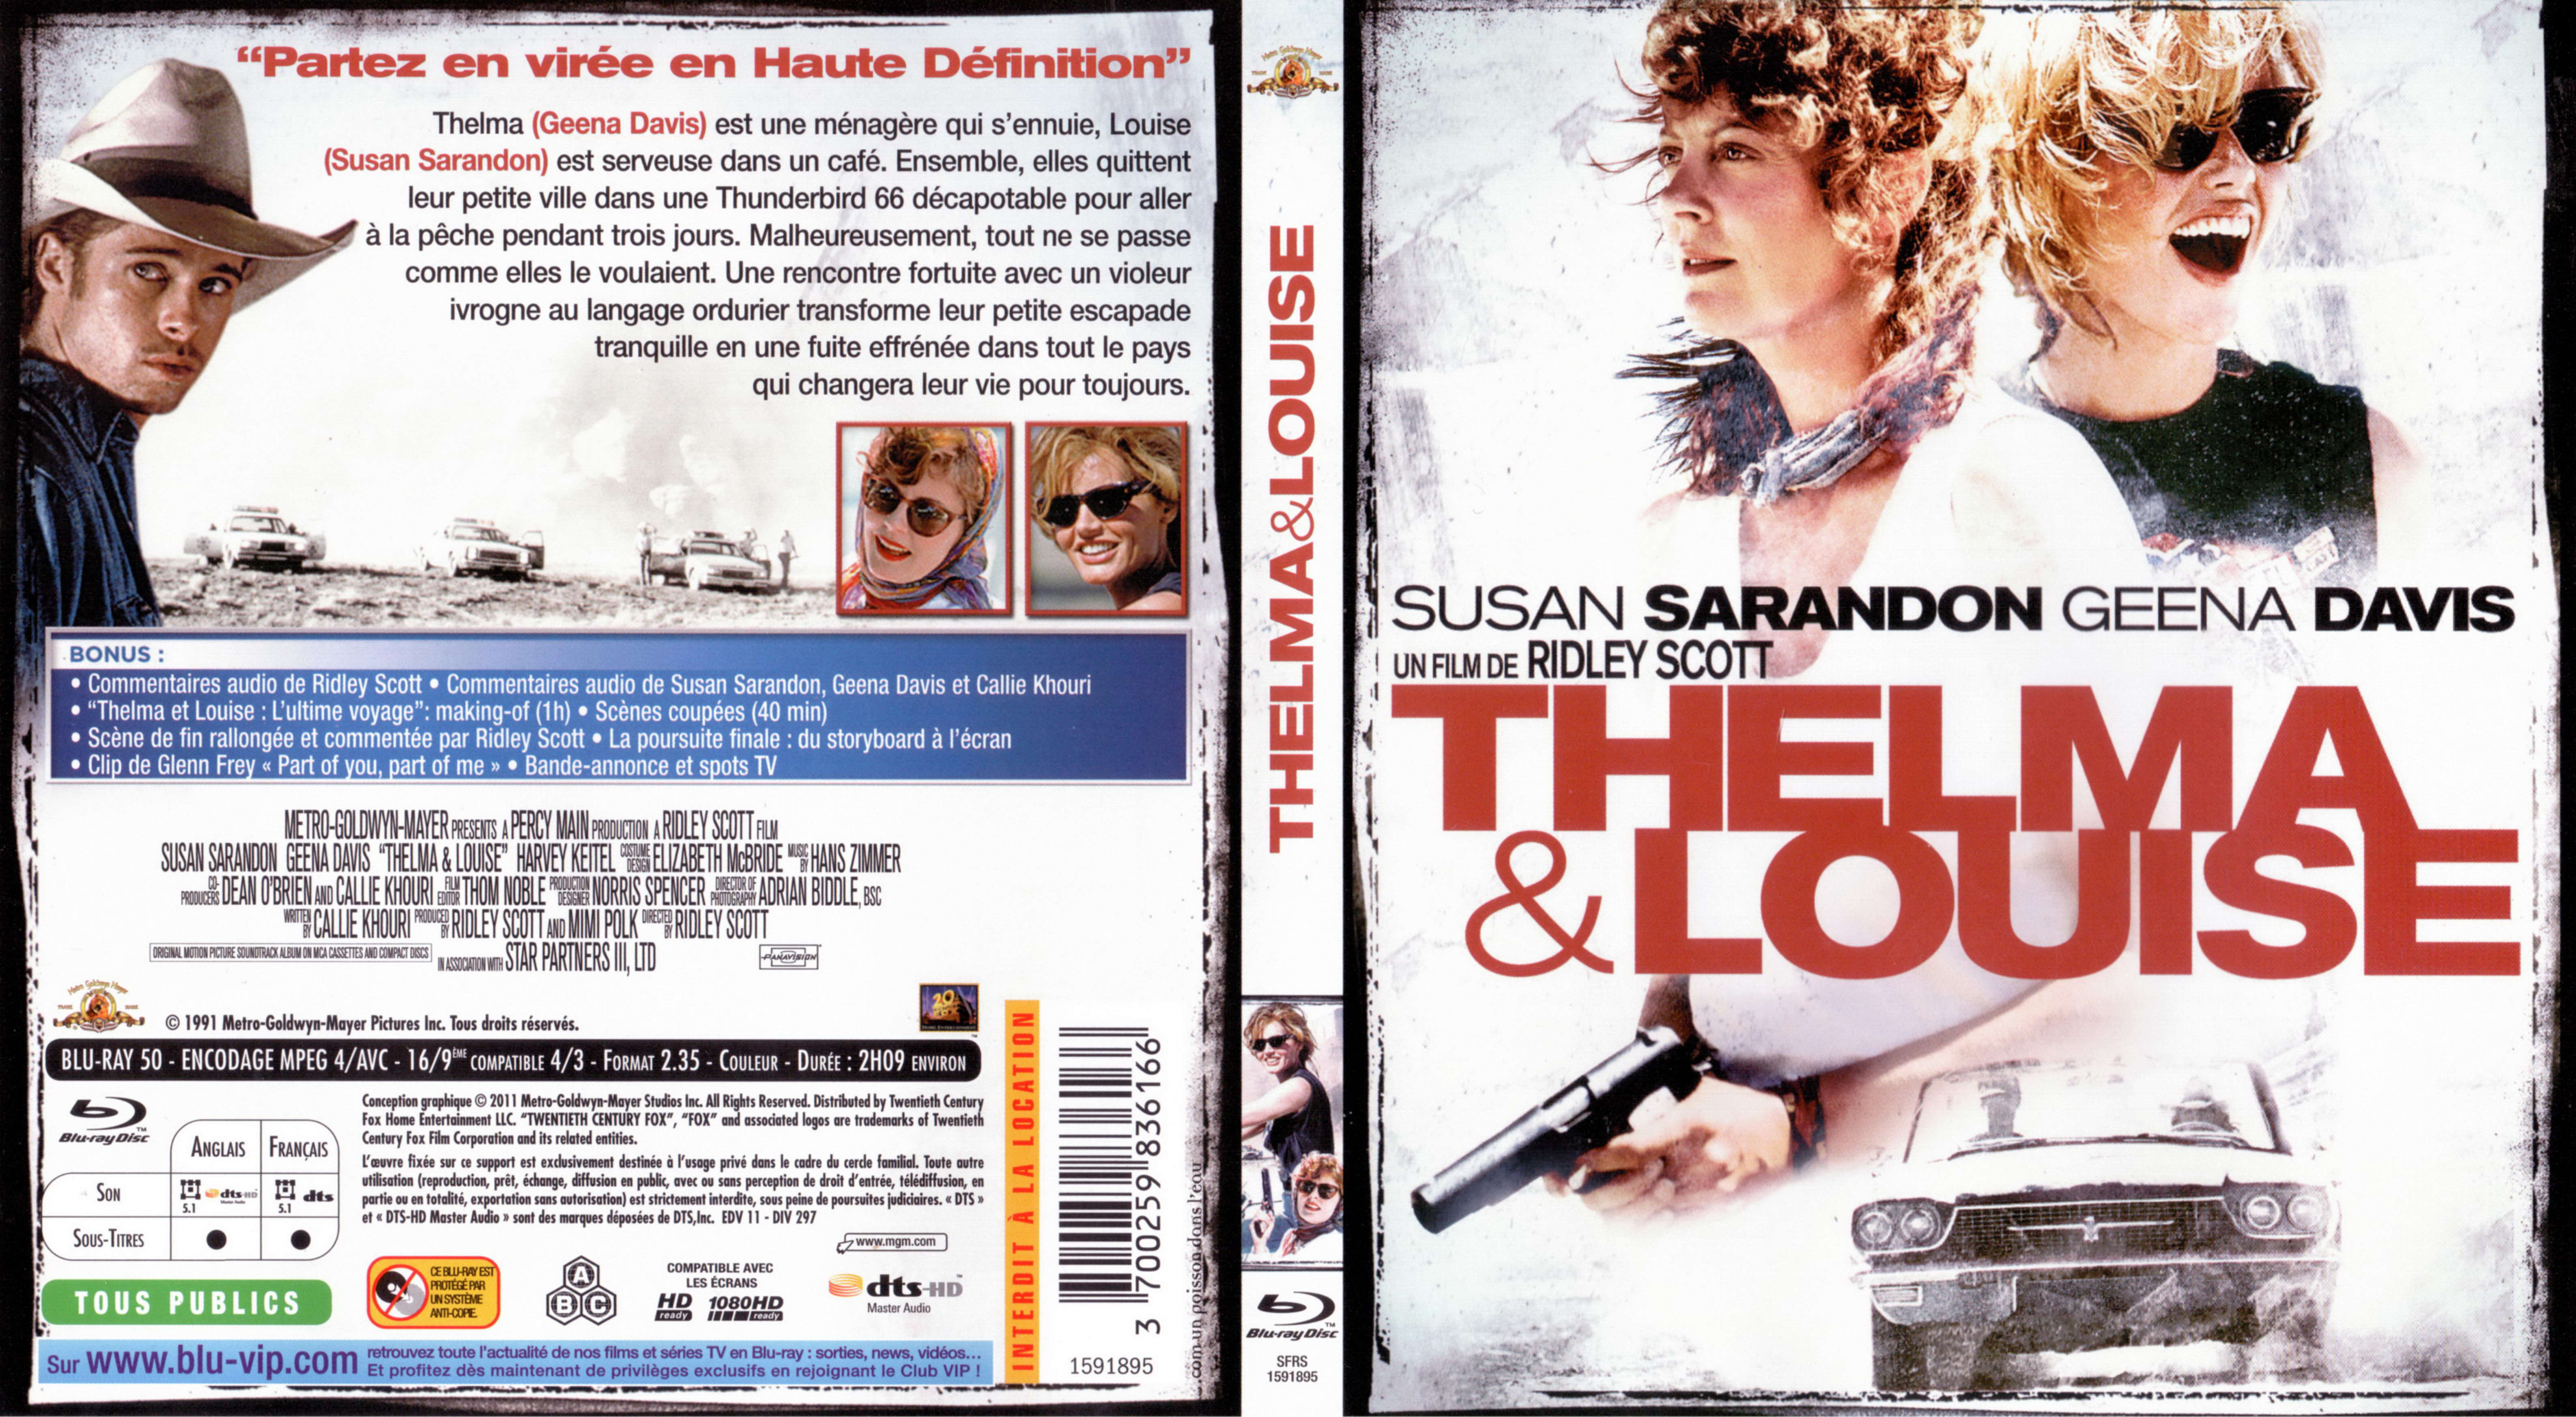 Jaquette DVD Thelma et Louise (BLU-RAY)